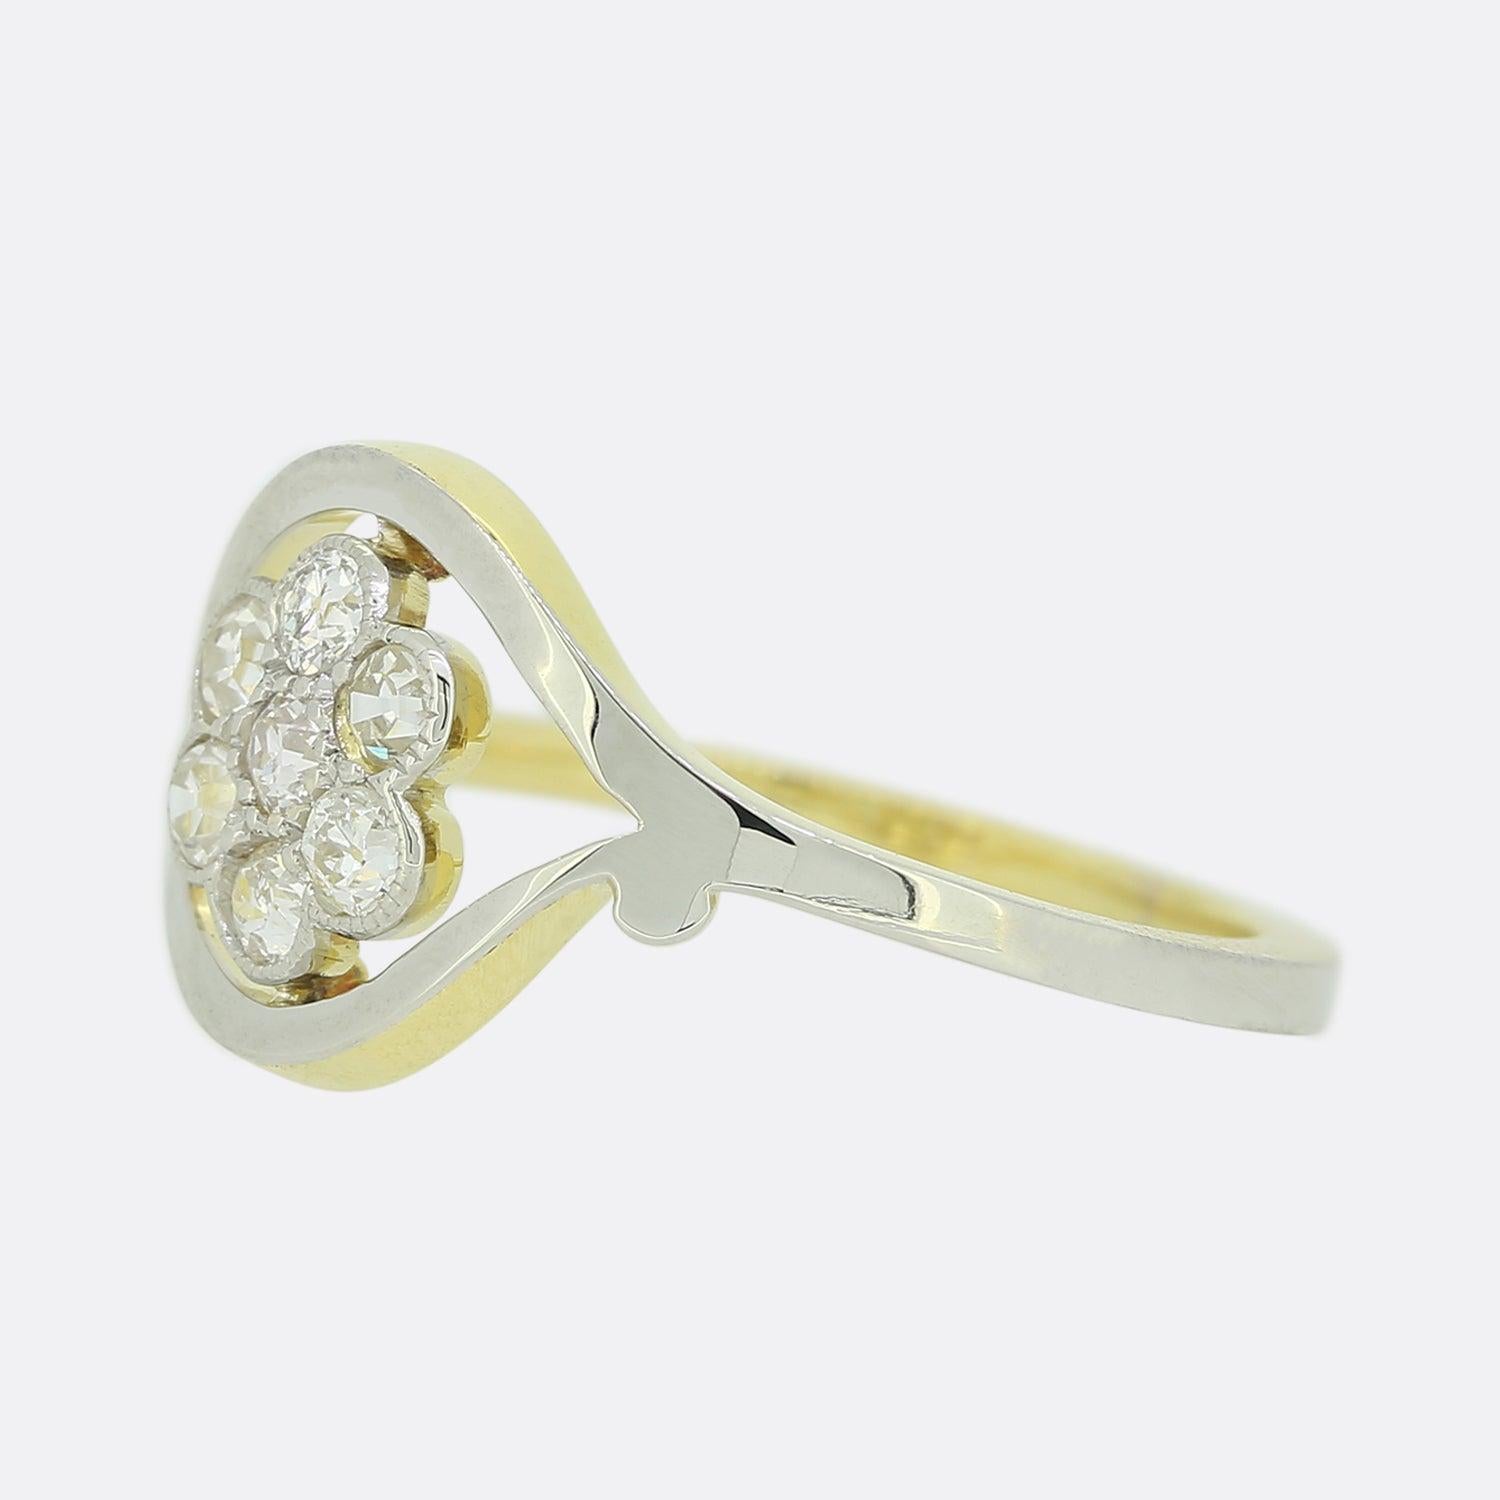 Here we a wonderful 18ct white and yellow gold diamond cluster ring. The head of the piece presents an open structure showcasing a total of  seven closely milgrain set old cut diamonds.  

This ring started life as a vintage brooch but has been